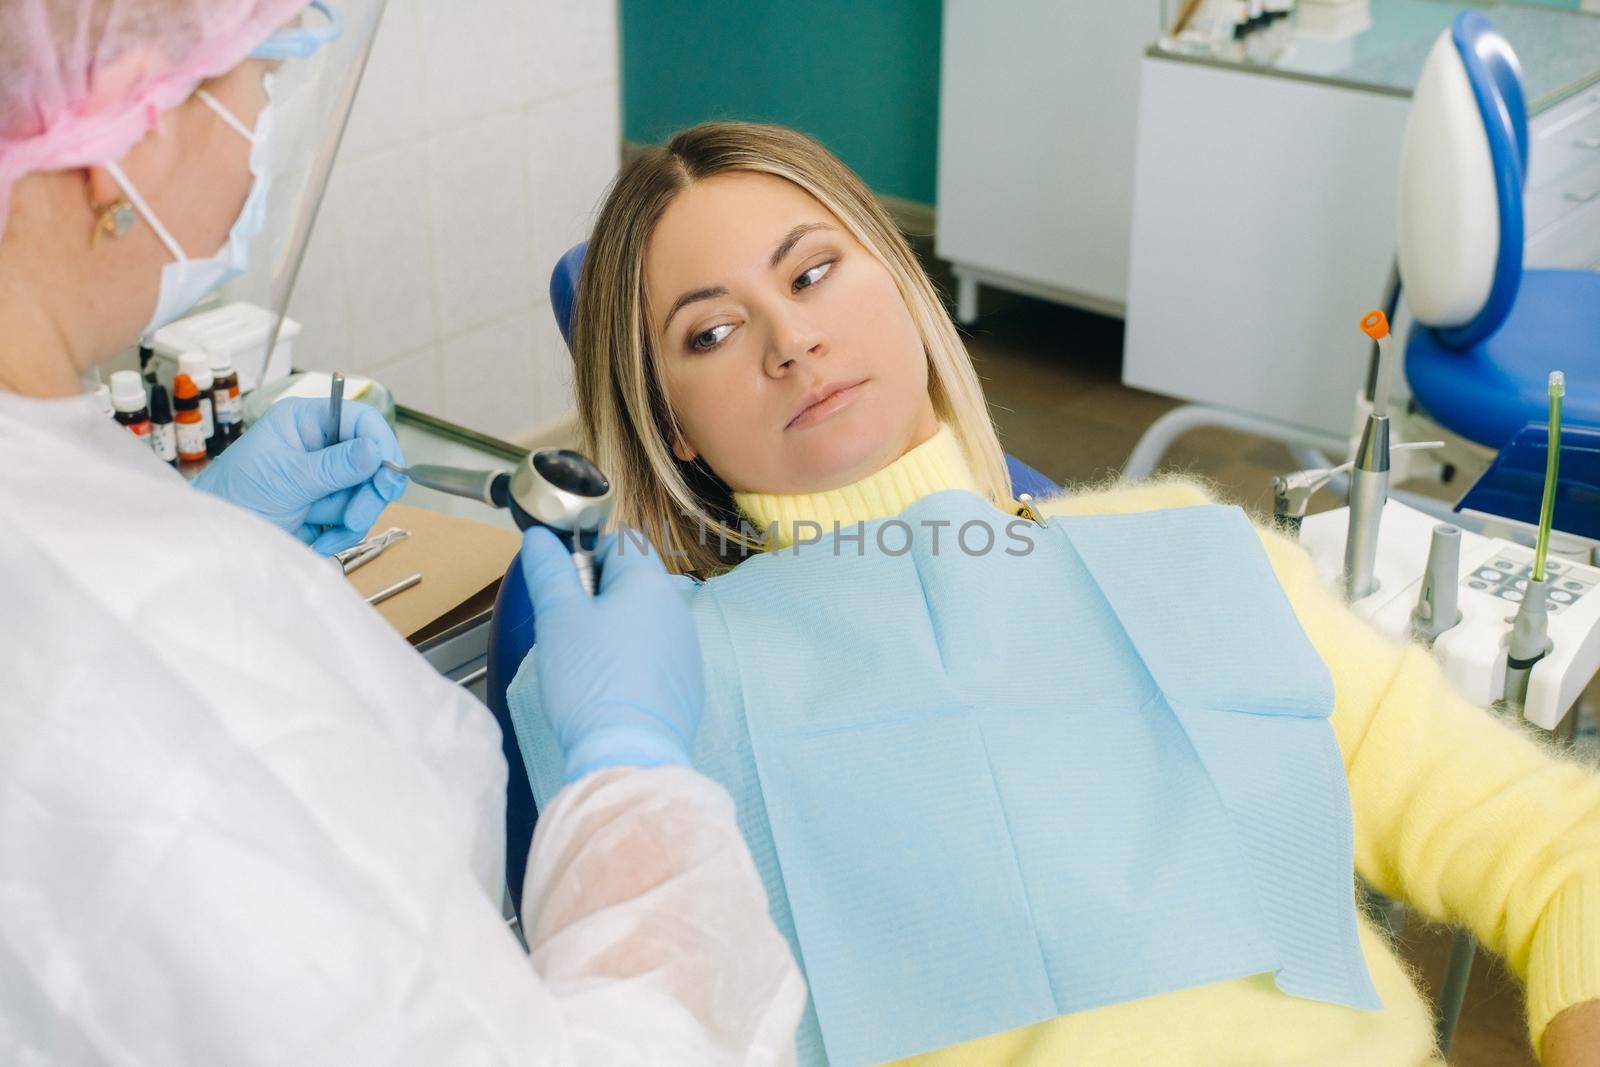 The girl is sitting in a dentist's chair before treatment and is afraid.